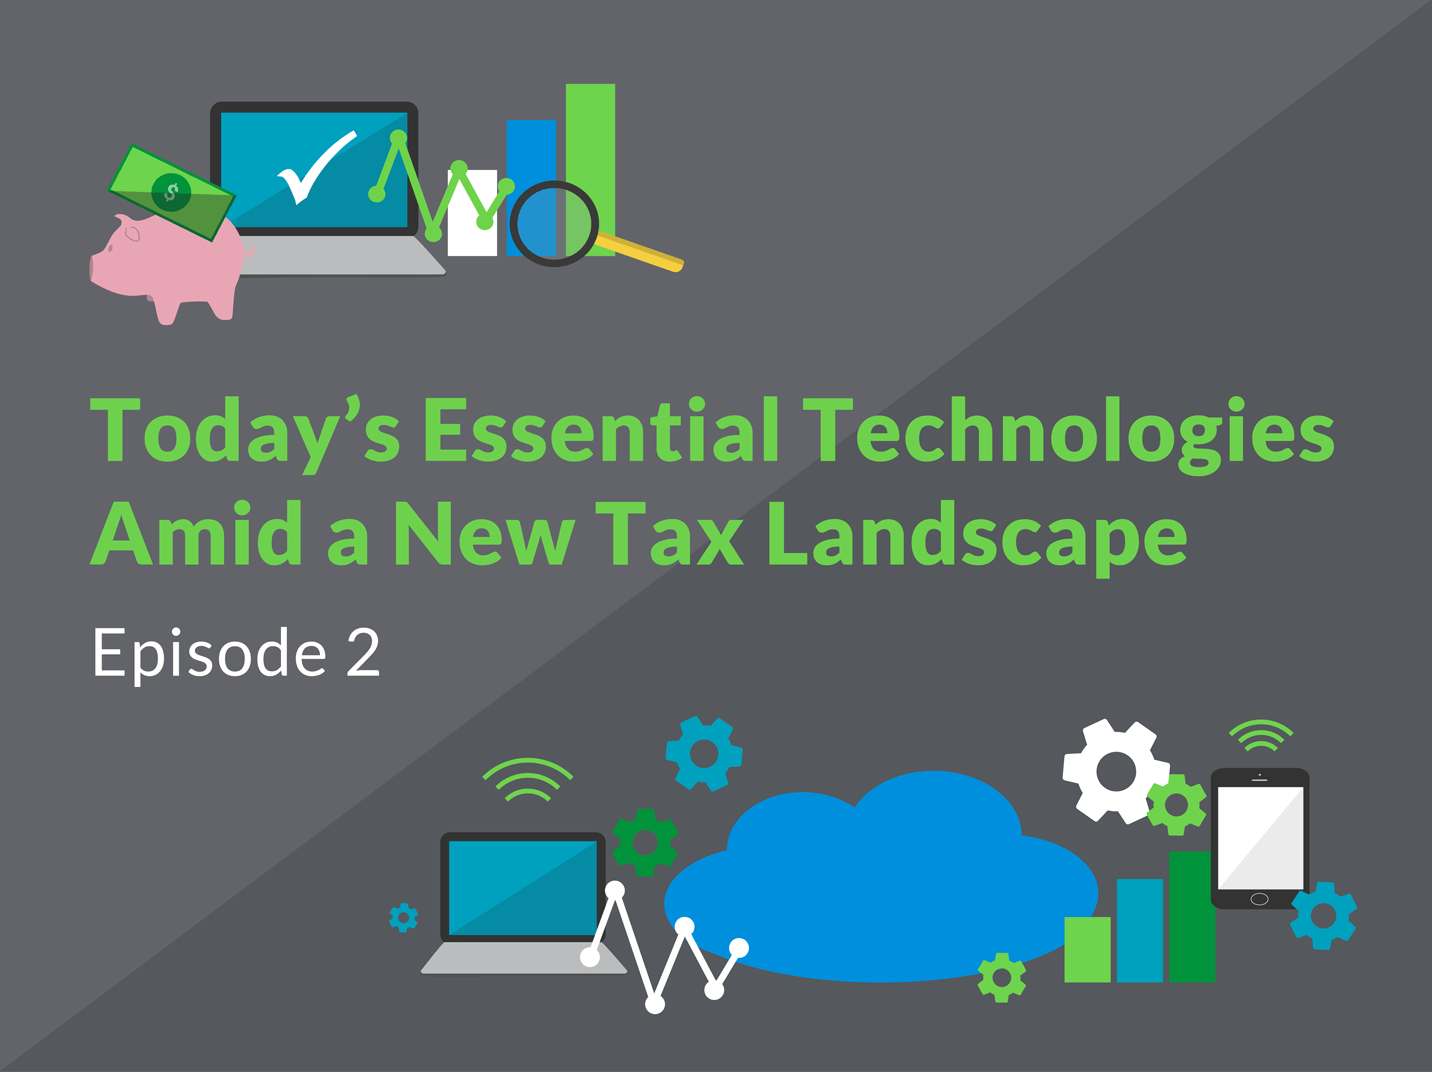 Today's Essential Technologies Amid a New Tax Landscape